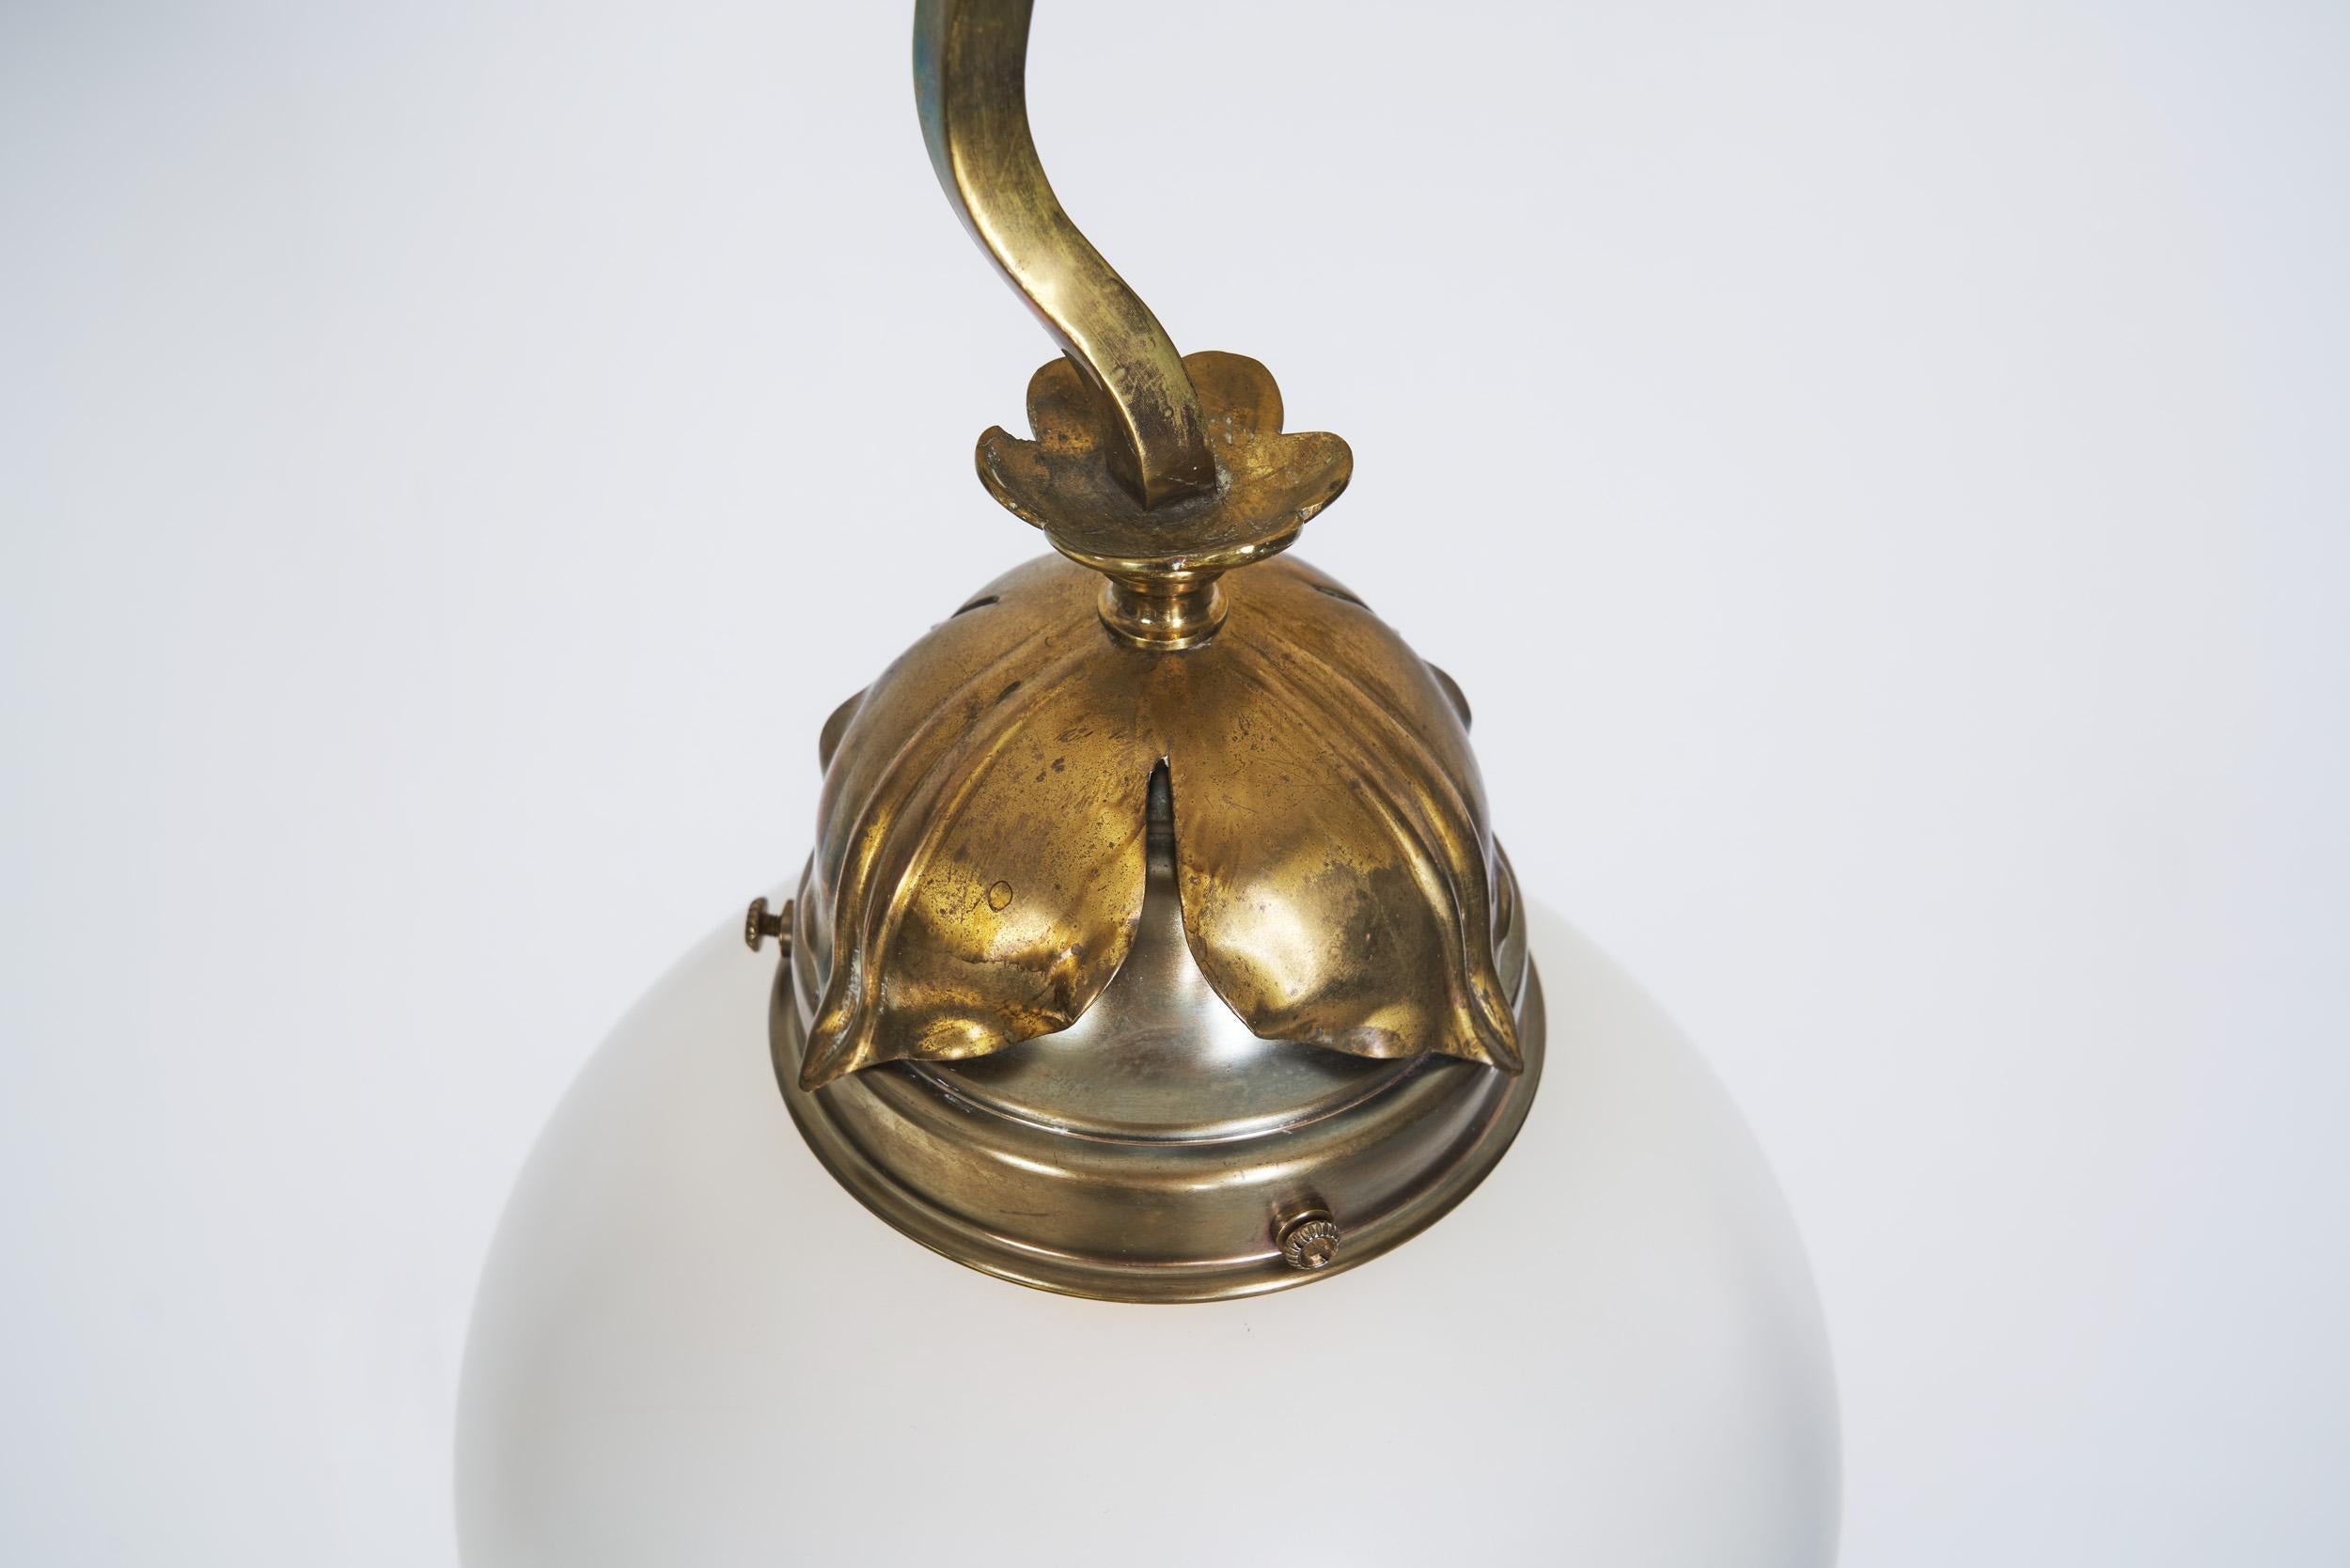 Jugend Ceiling Lamp in Patinated Brass and Glass, Europe early 20th century For Sale 11